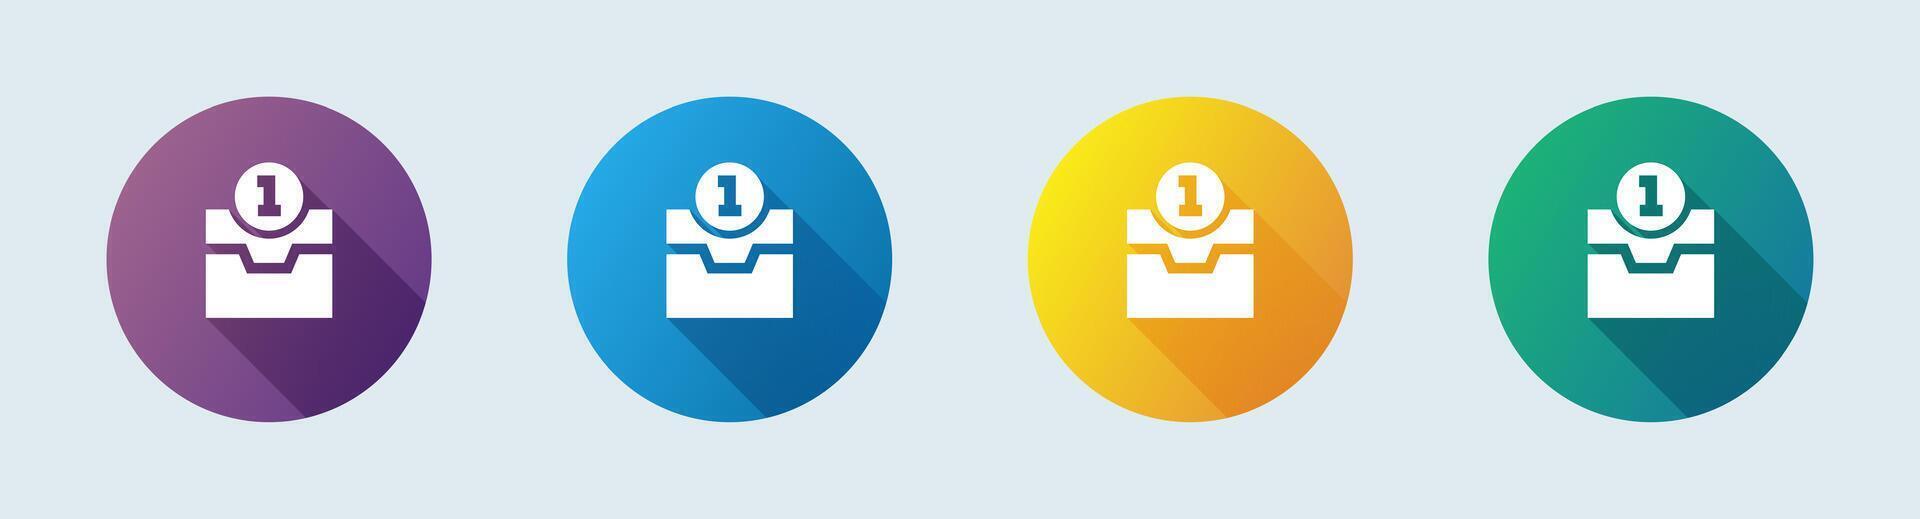 Direct message solid icon in flat design style. Inbox signs vector illustration.